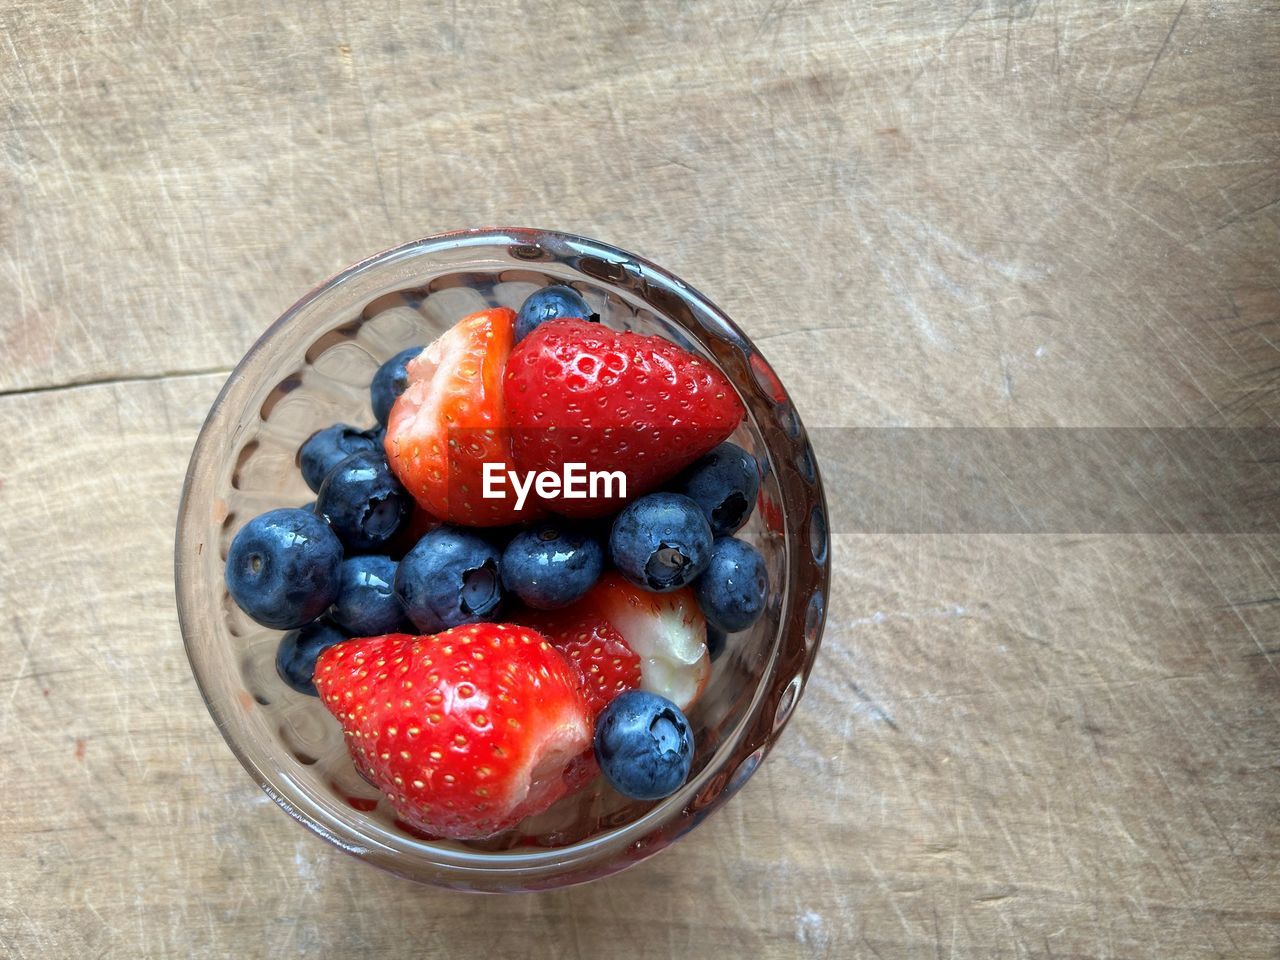 berry, healthy eating, food and drink, food, fruit, freshness, strawberry, wellbeing, plant, bowl, high angle view, blueberry, directly above, table, breakfast, produce, indoors, meal, wood, still life, no people, raspberry, red, dessert, berries, close-up, container